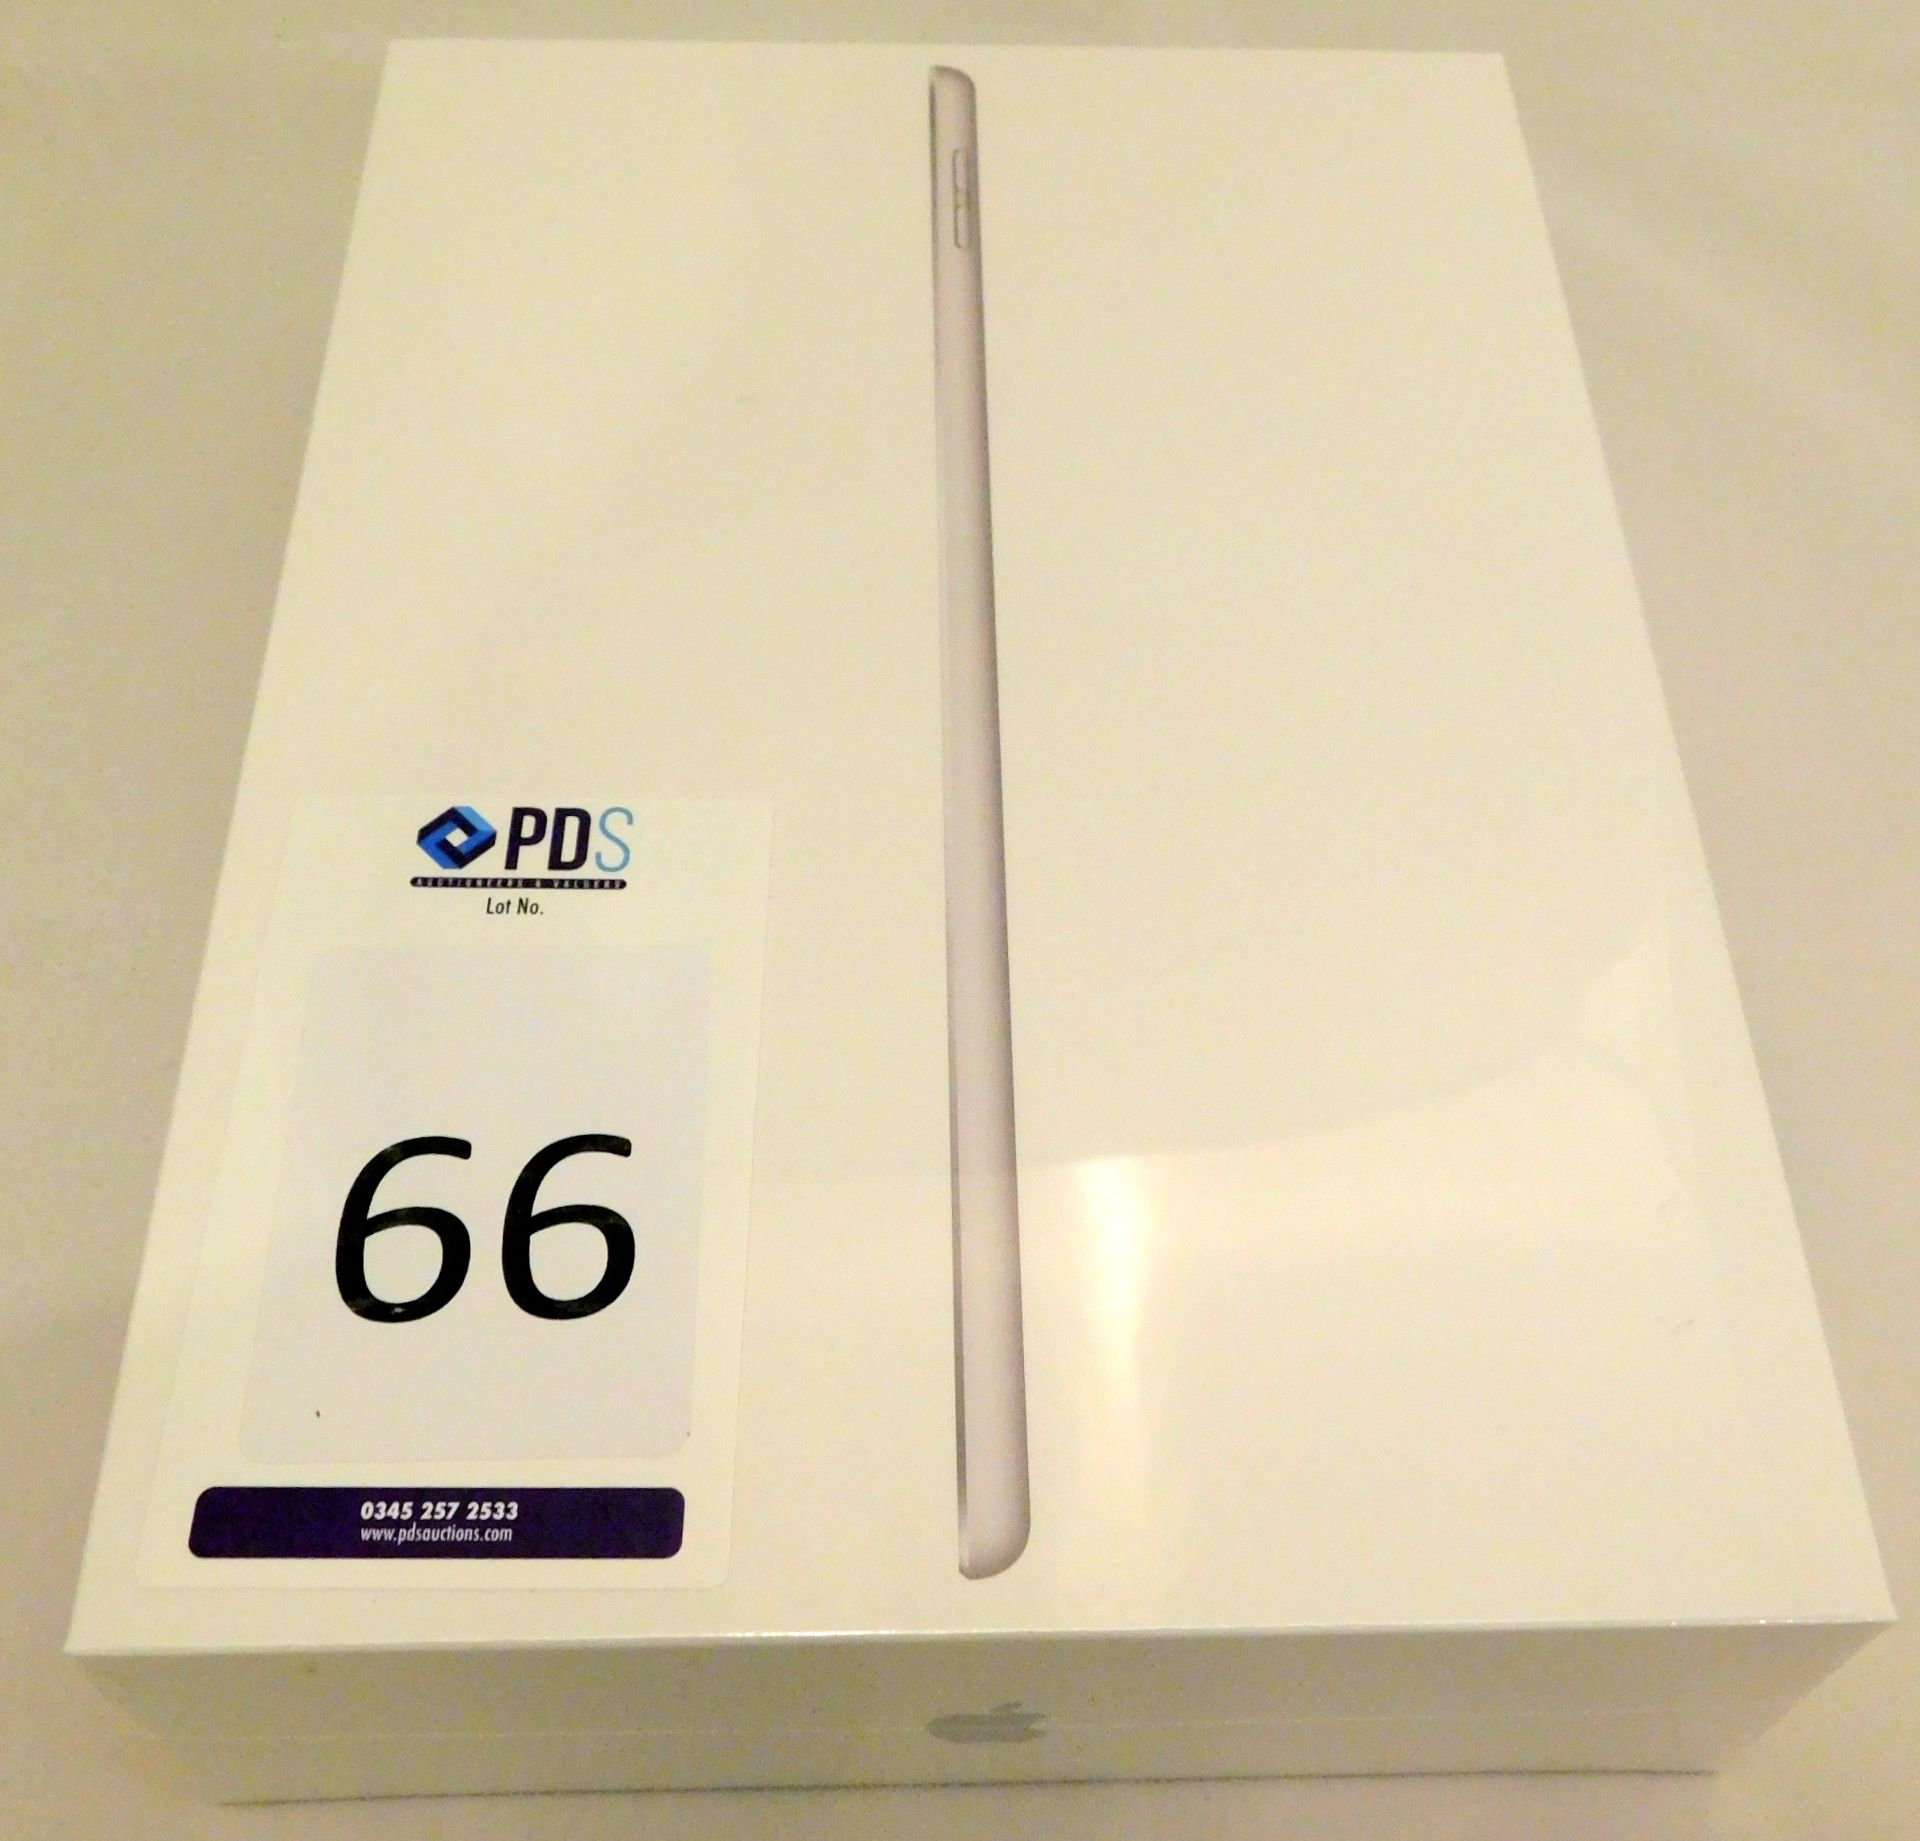 Apple A2197 iPad, 7th Gen, 32GB, Silver, Serial Number: DMPC80TTMF3N, (New in Sealed Box) (Located